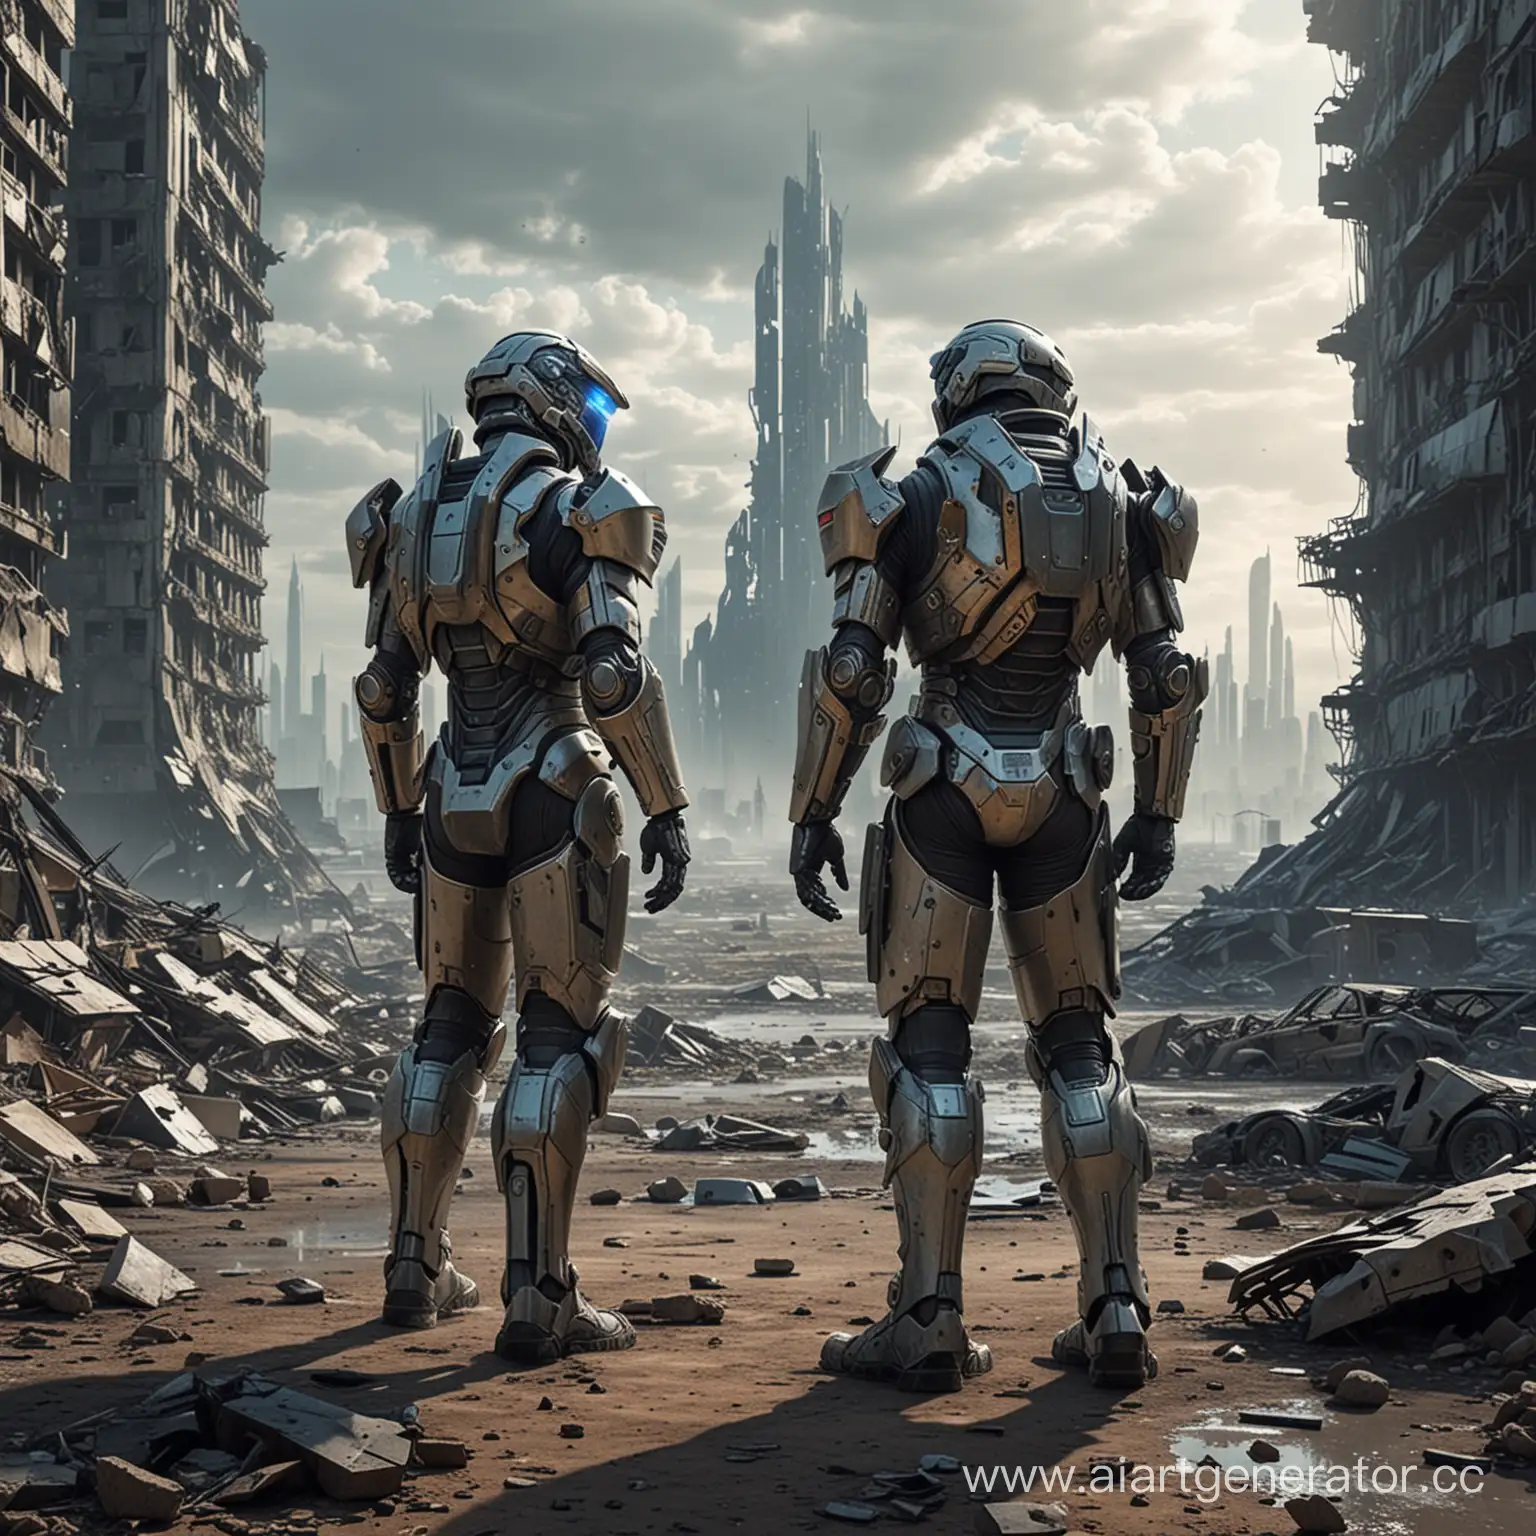 Futuristic-Armored-Soldiers-Amidst-Ruins-of-Future-City